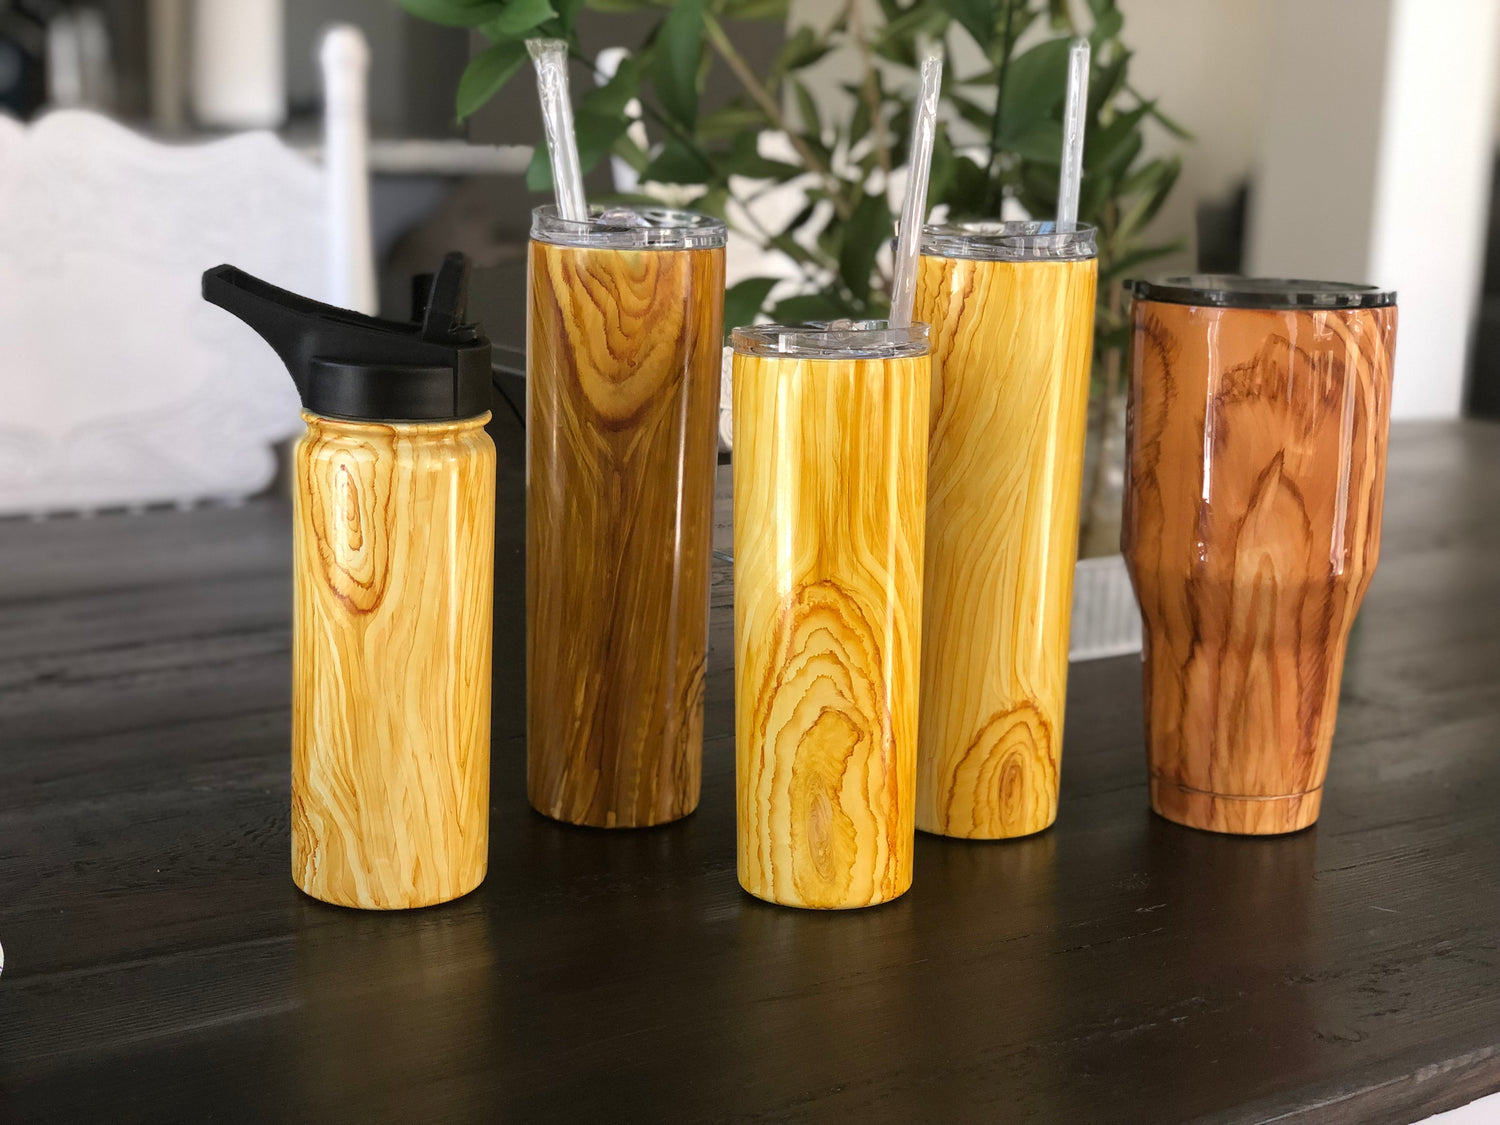 Appealing Wood Tumbler For Aesthetics And Usage 